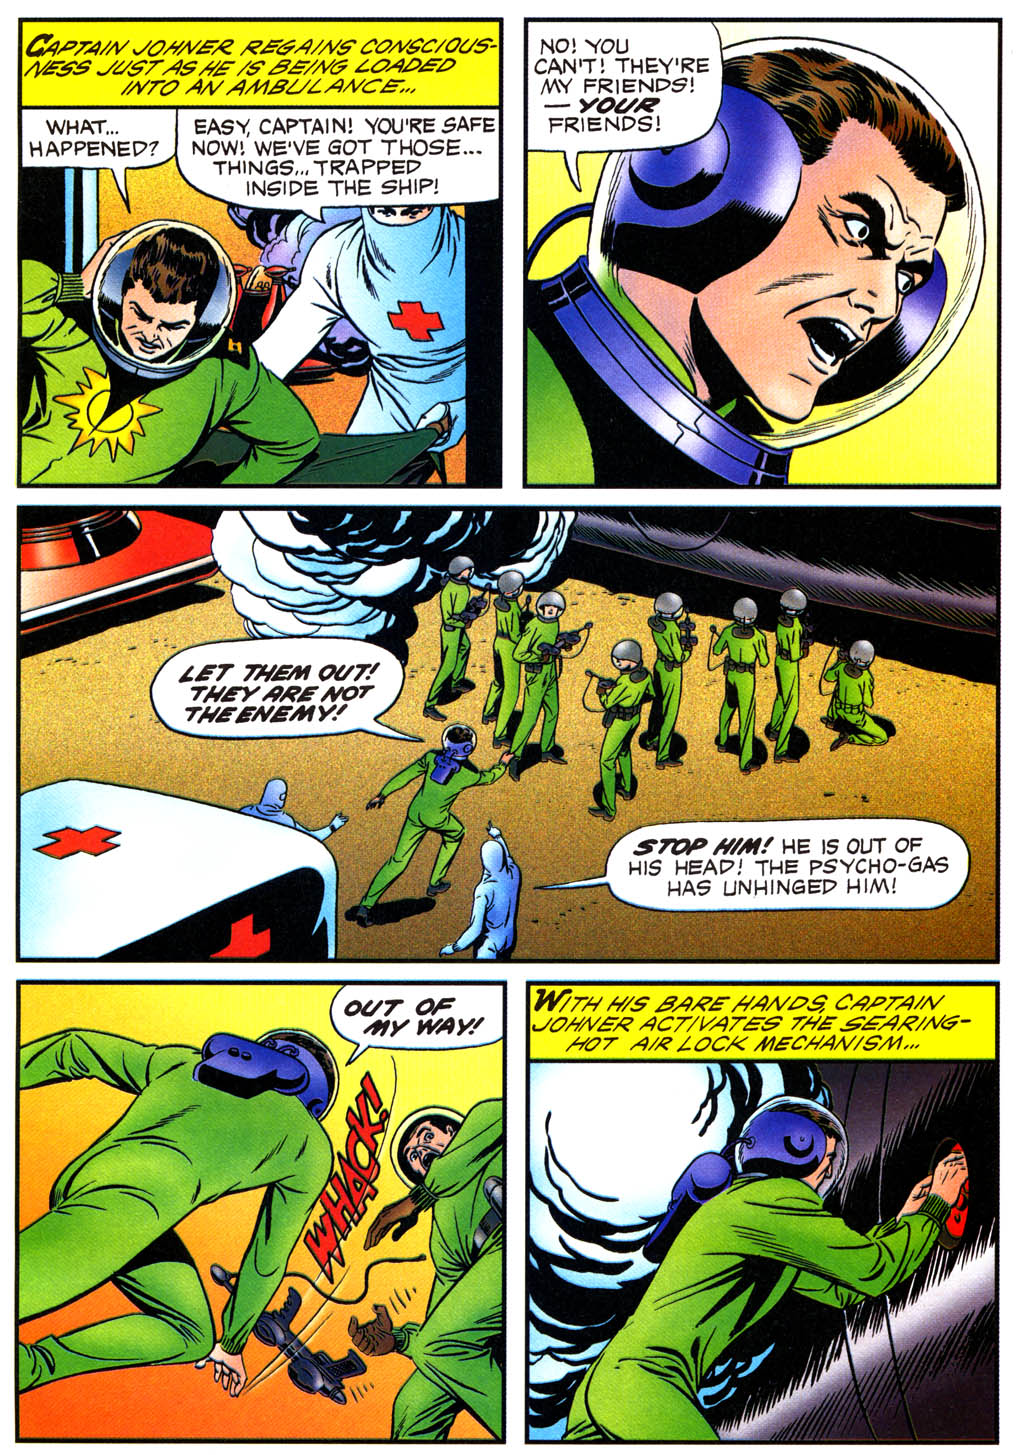 Captain Johner & the Aliens issue 2 - Page 13